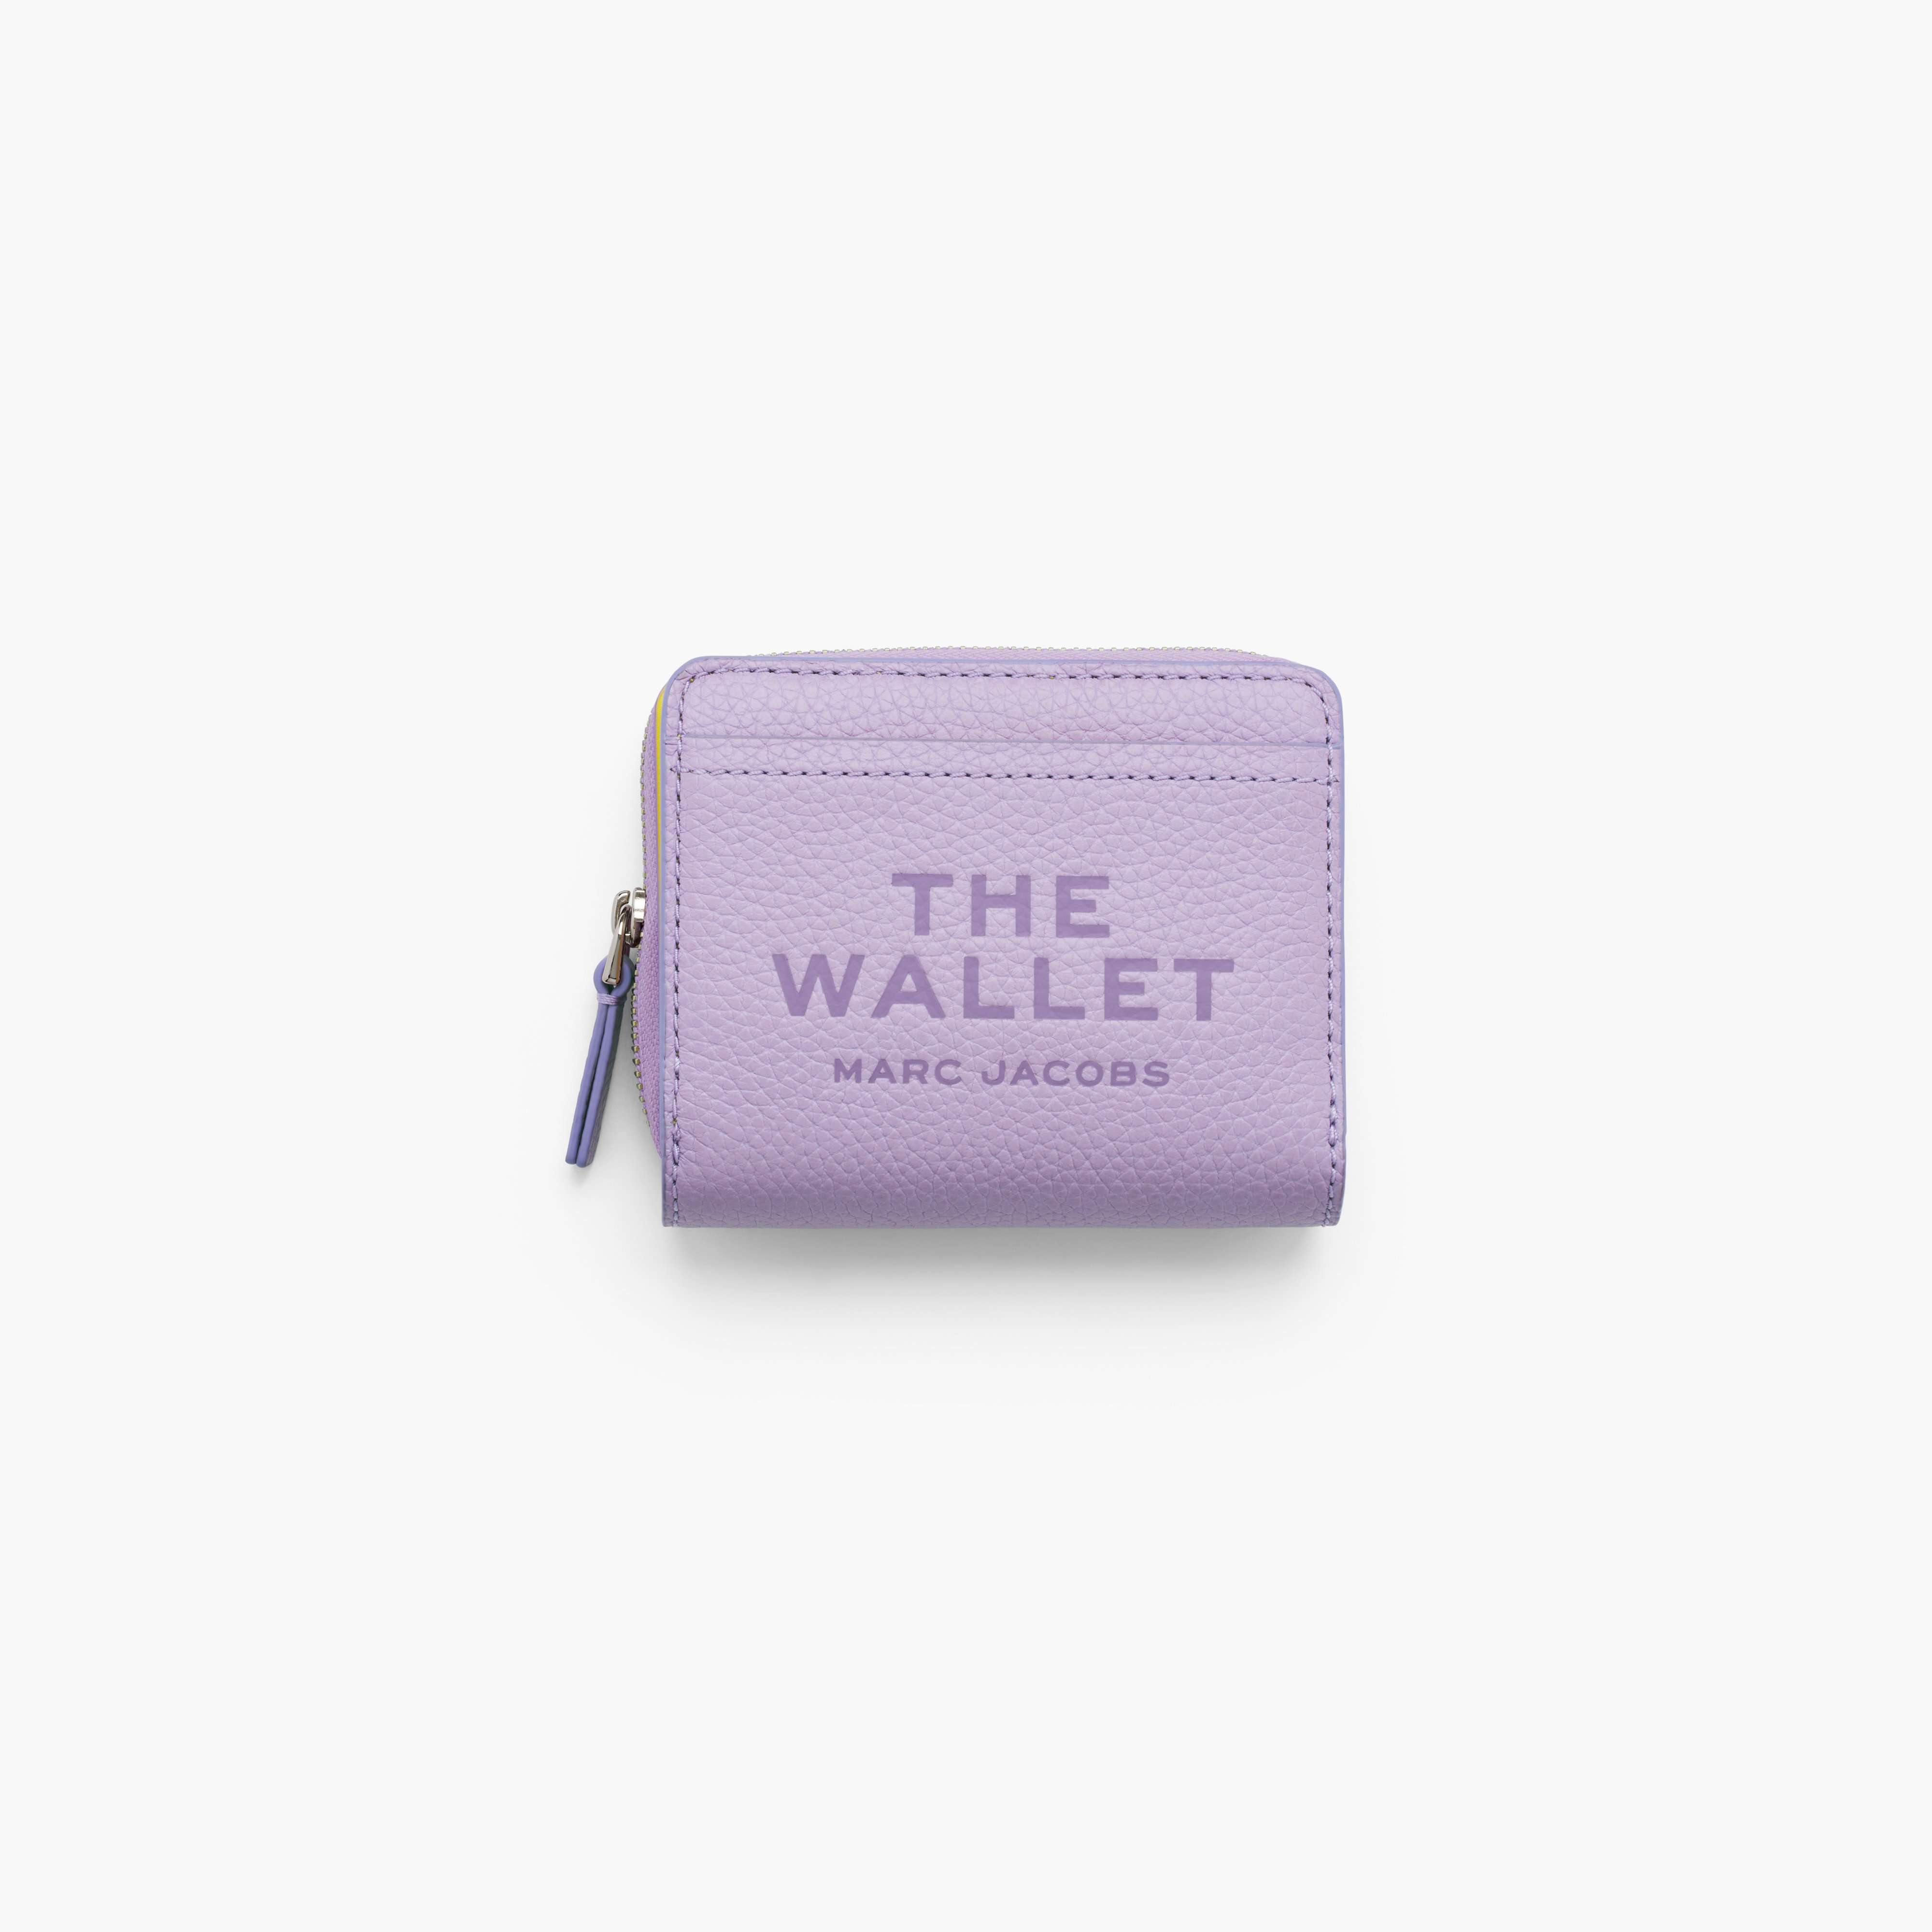 The Leather Mini Compact Wallet in Wisteria